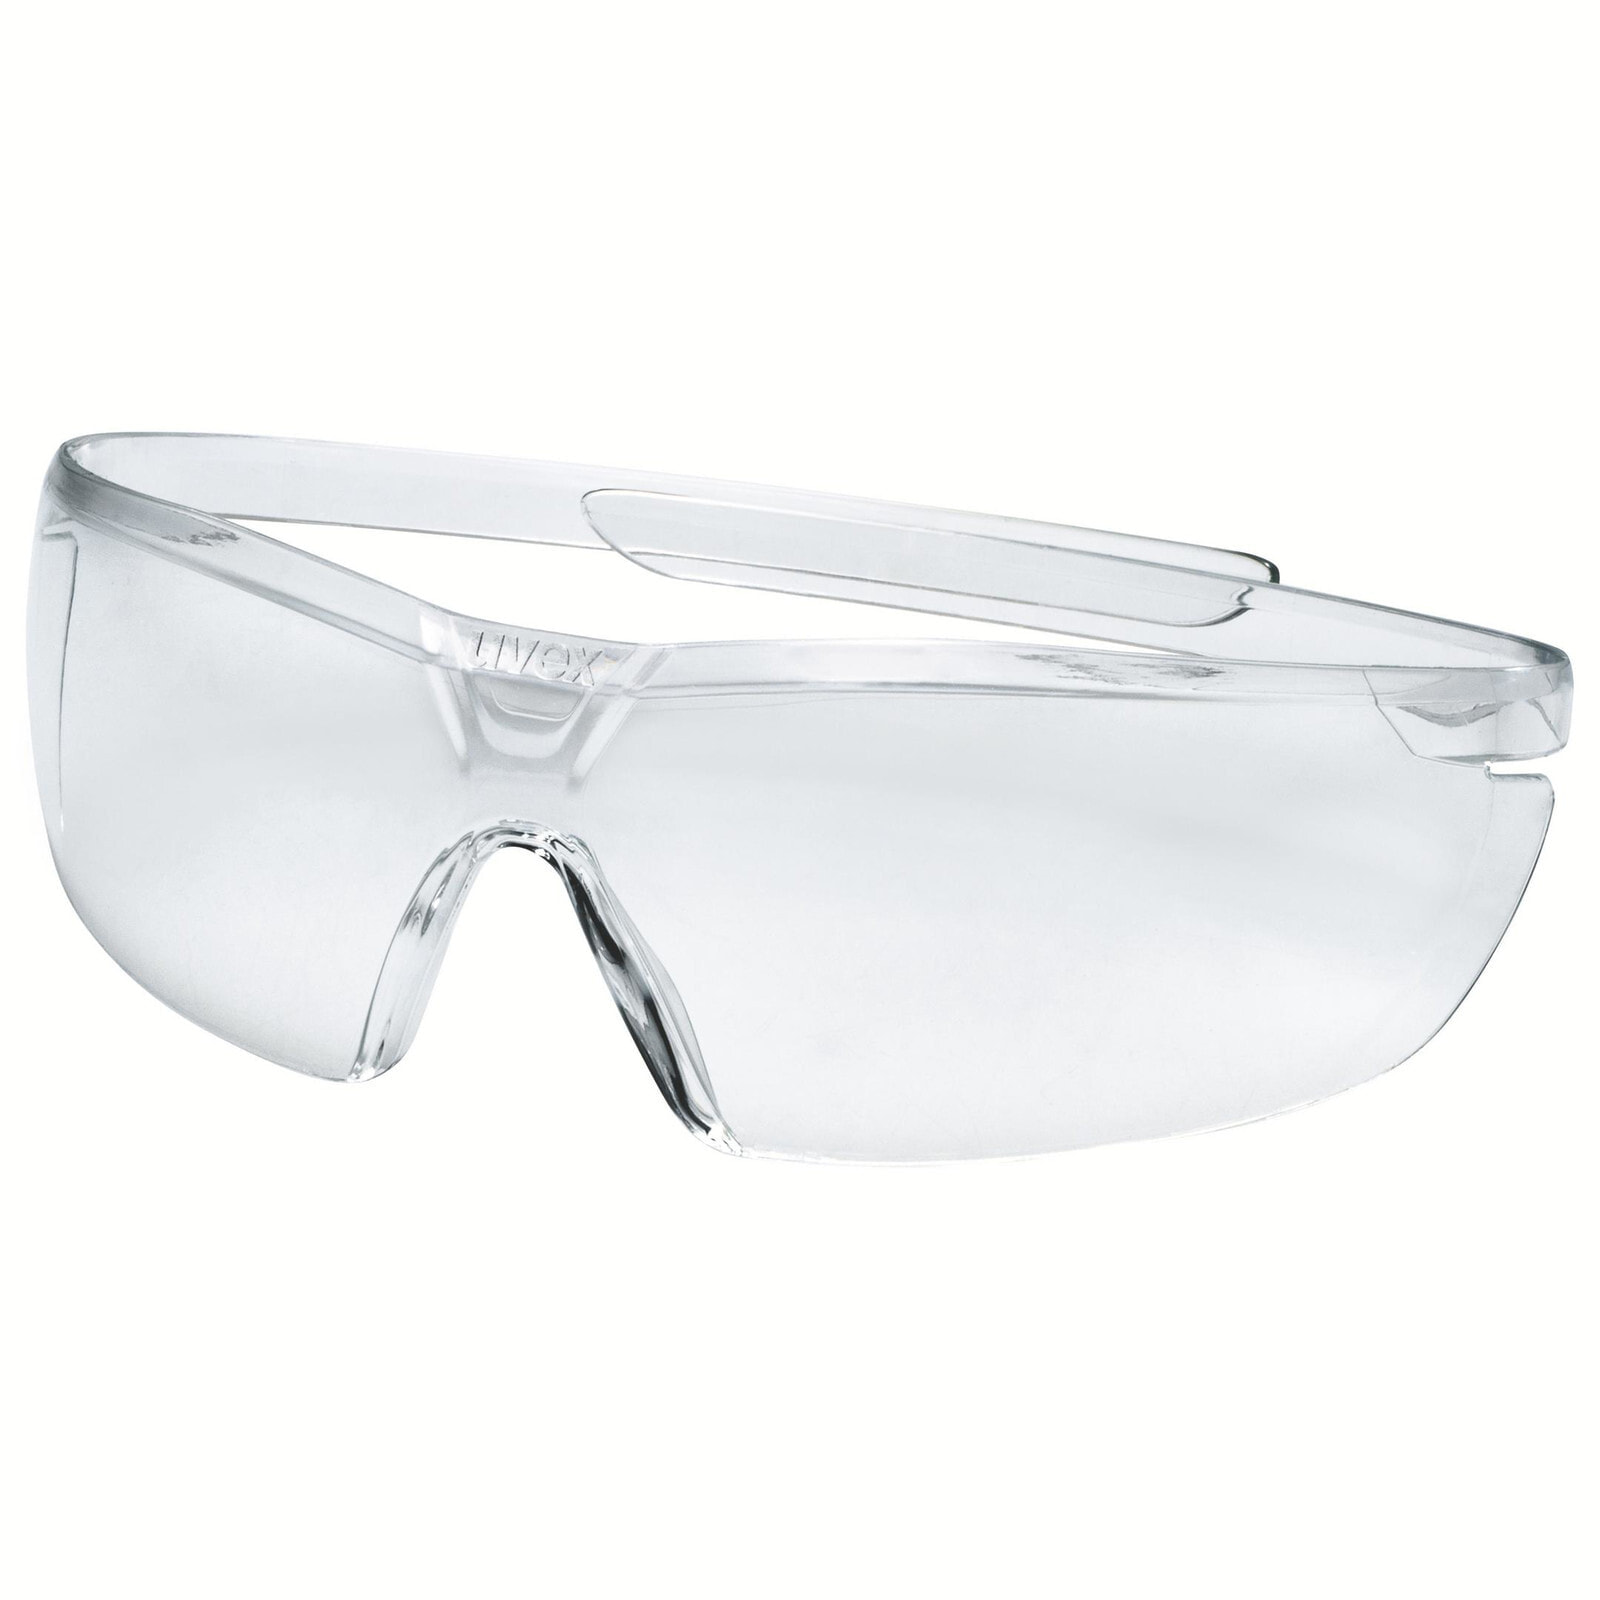 UVEX Arbeitsschutz pure-fit - Safety glasses - Any gender - CE - Transparent - Transparent - Polycarbonate (PC)